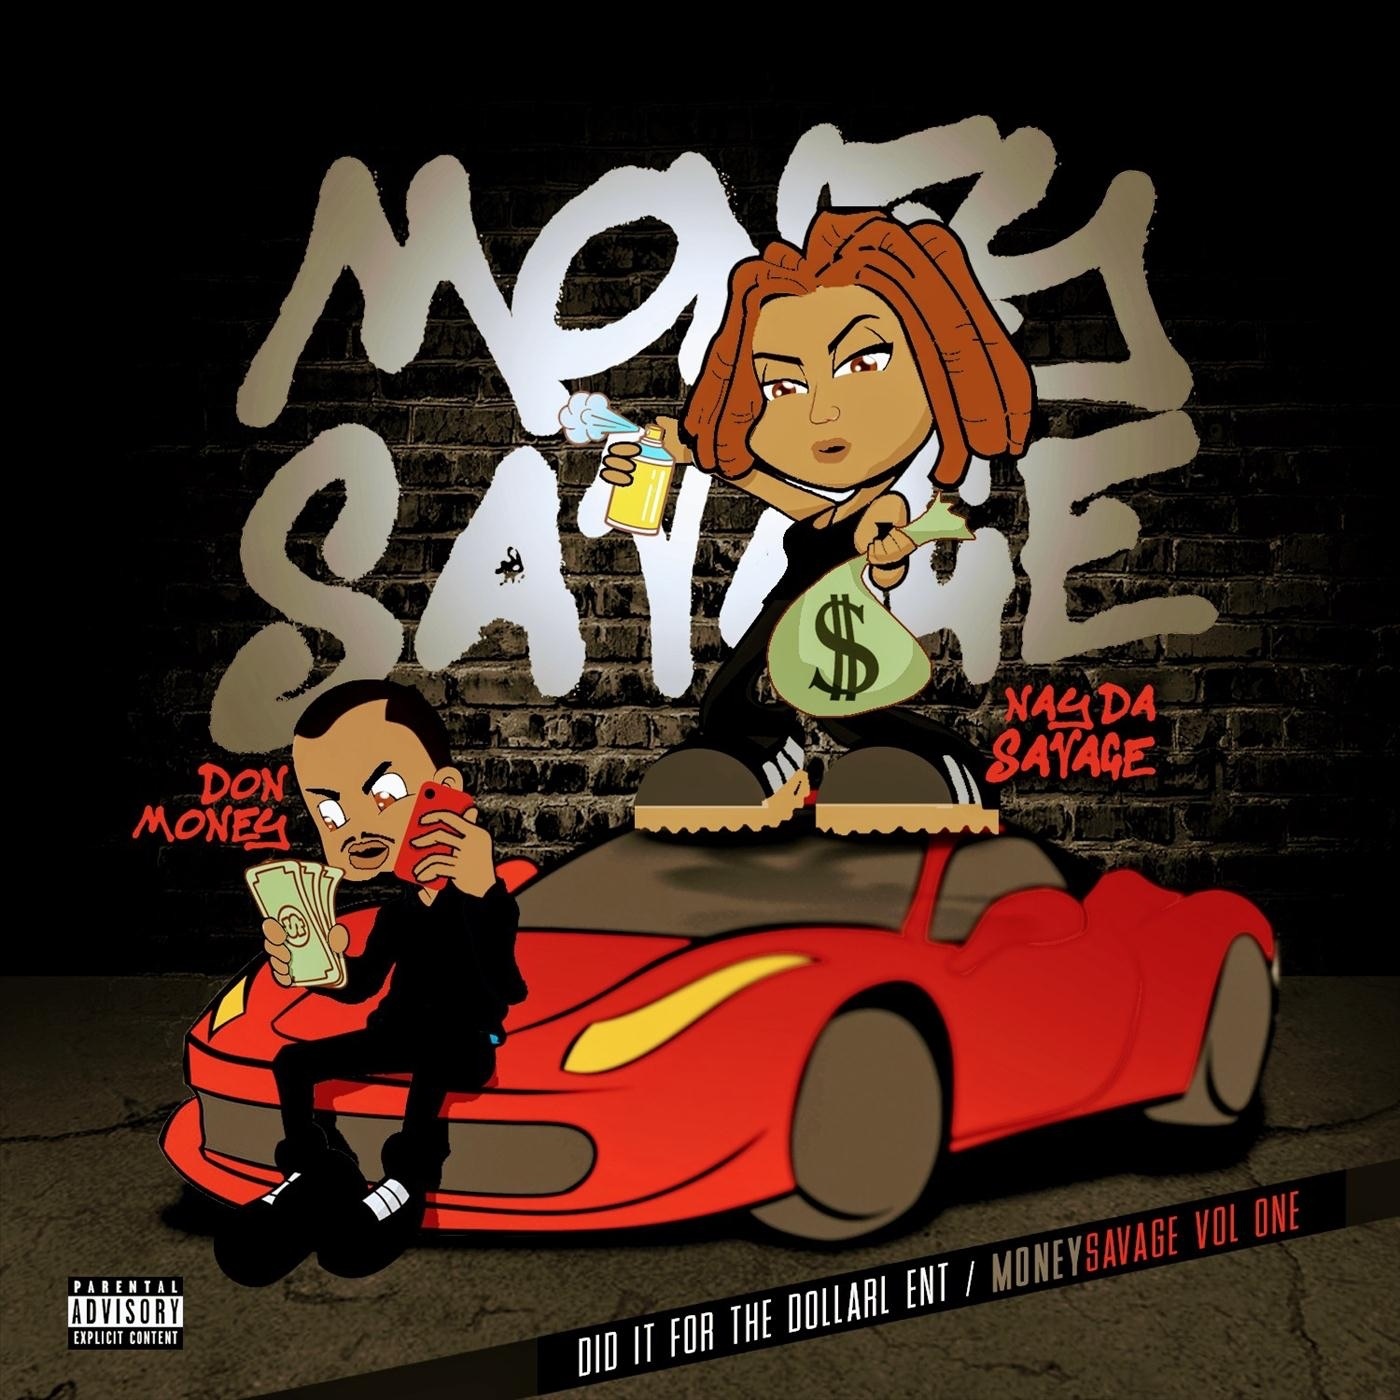 Art for Baseline (feat. Pezoe Pope) by Don Money & Naydasavage